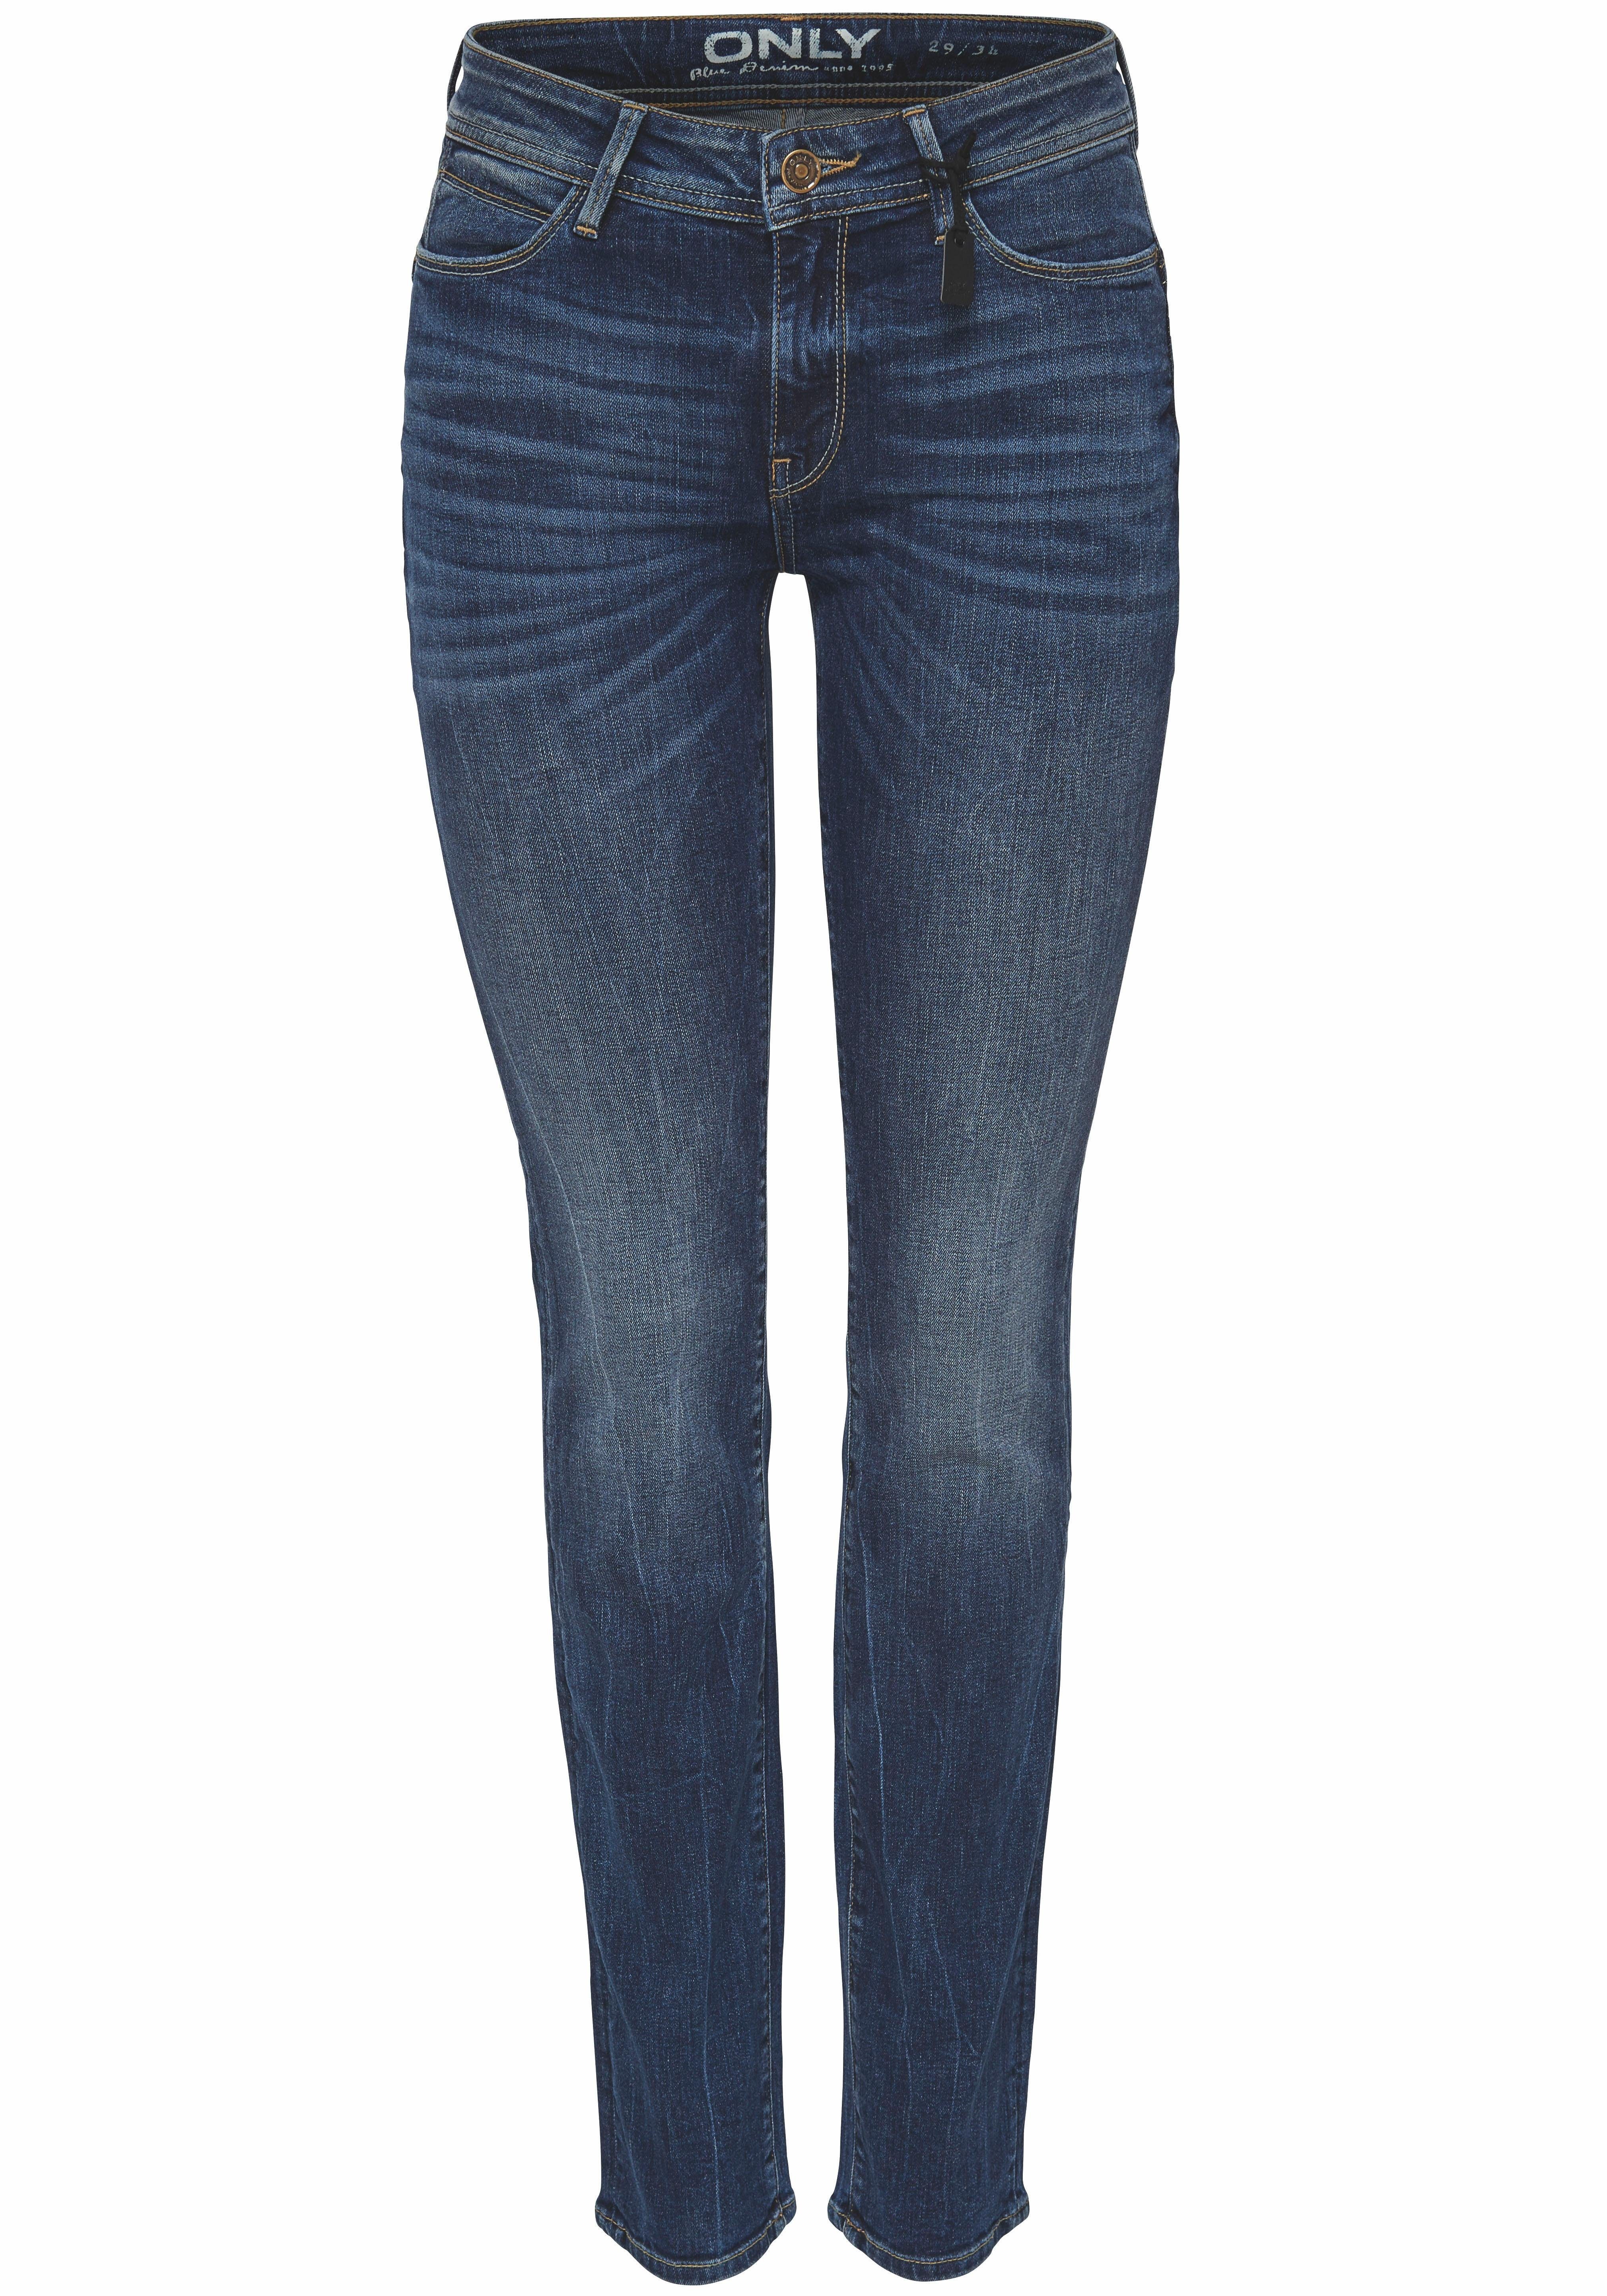 Only NU 15% KORTING: Only slim fit jeans SISSE